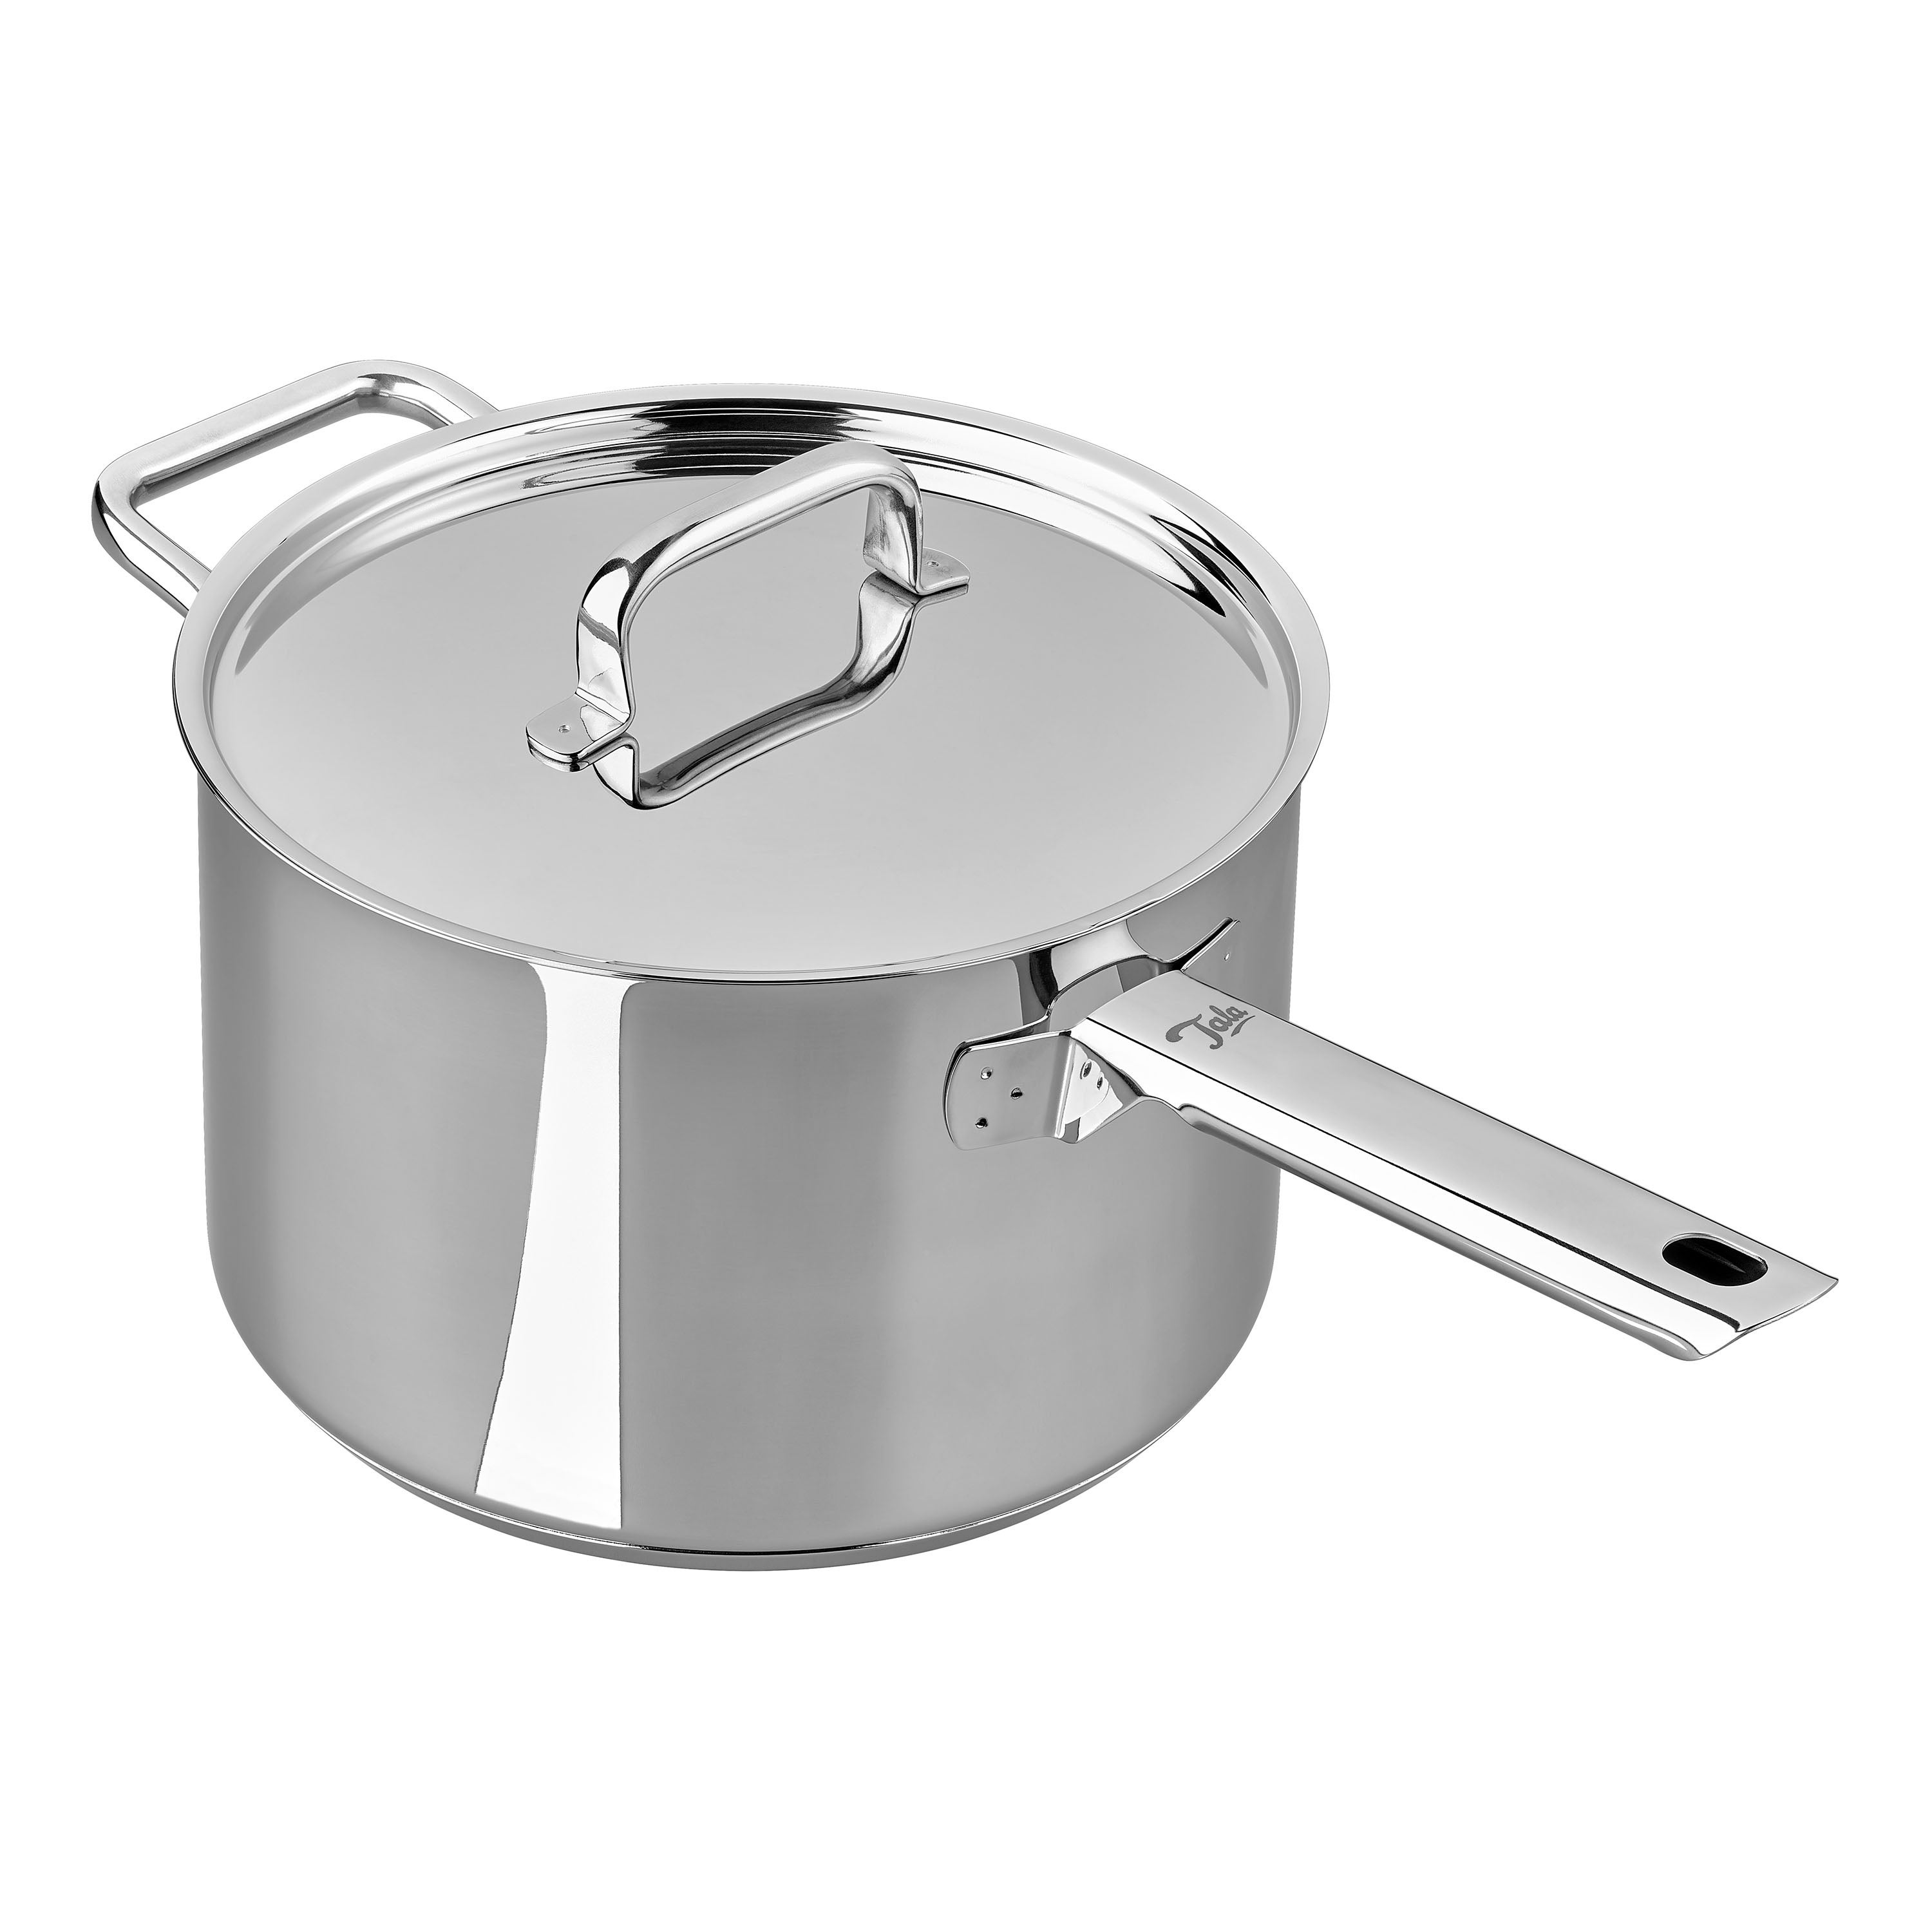 Tala Performance Superior Stainless Steel Deep Saucepan with Lid, 20cm